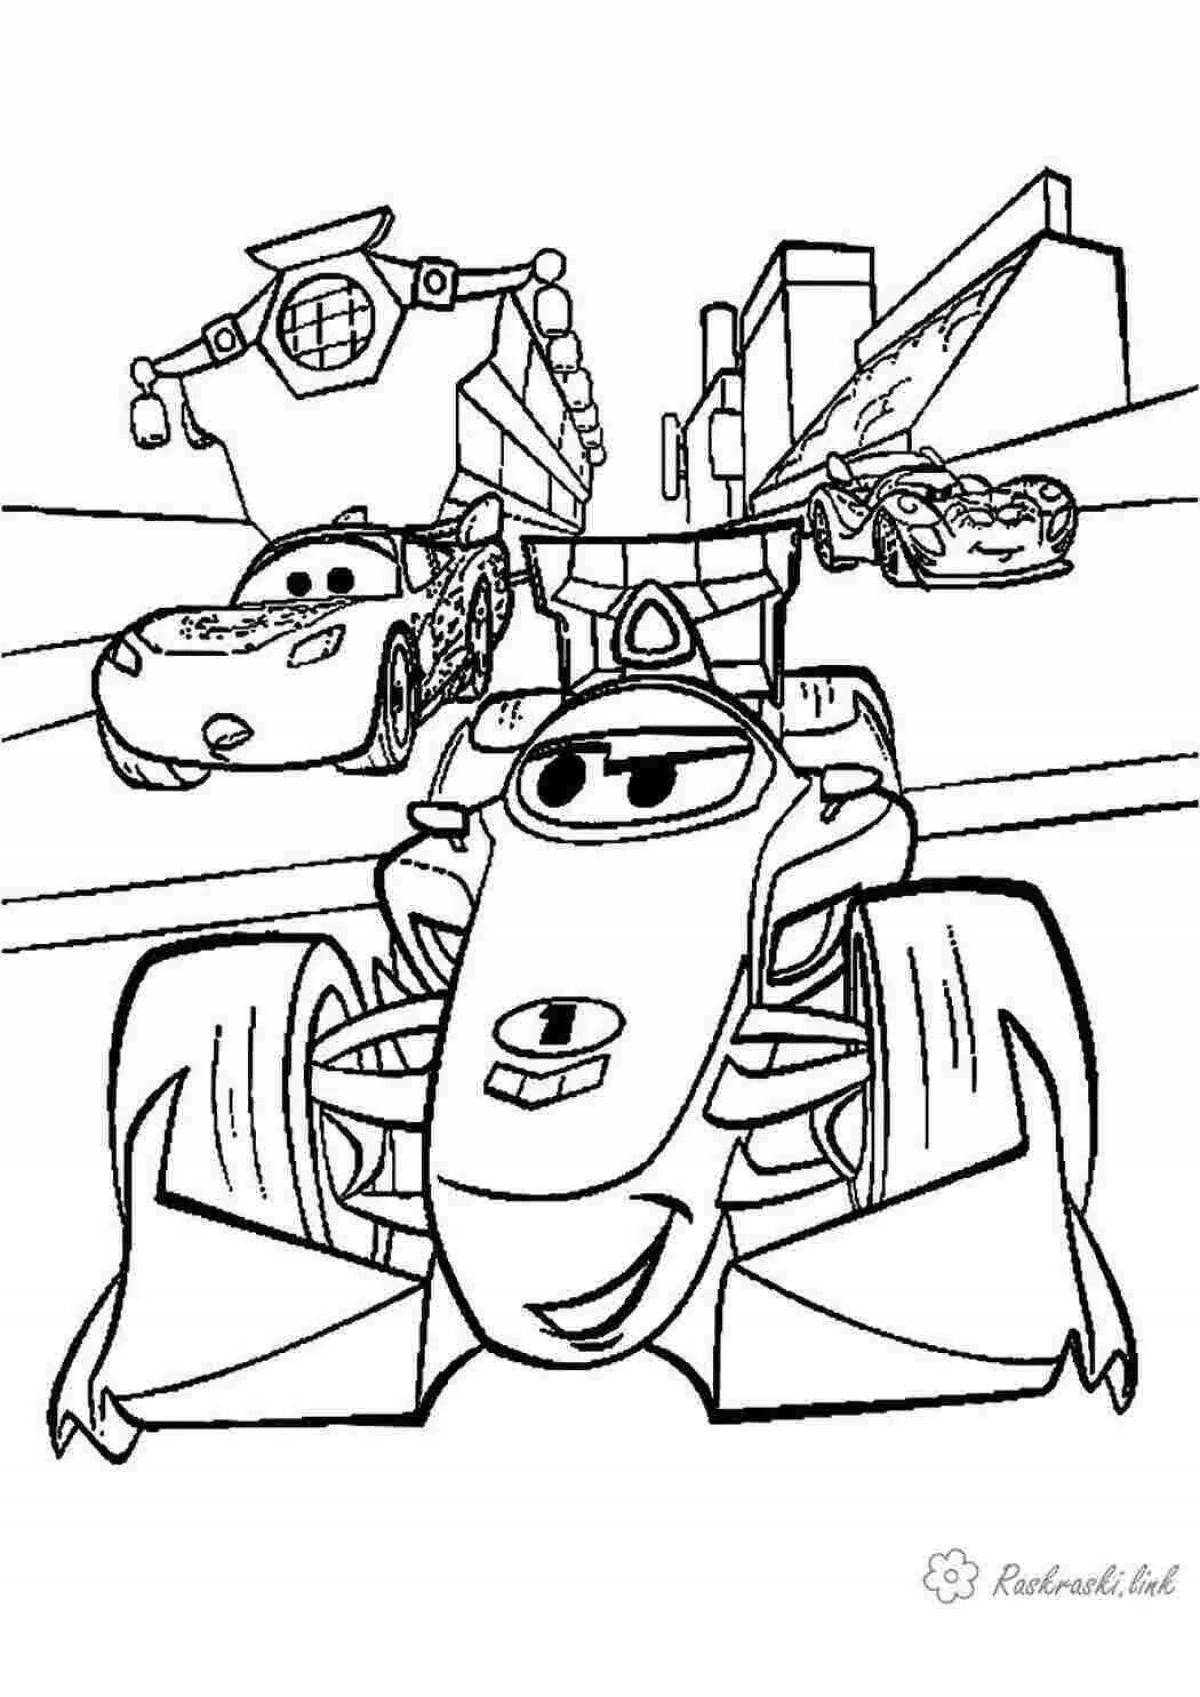 Coloring great cars 2